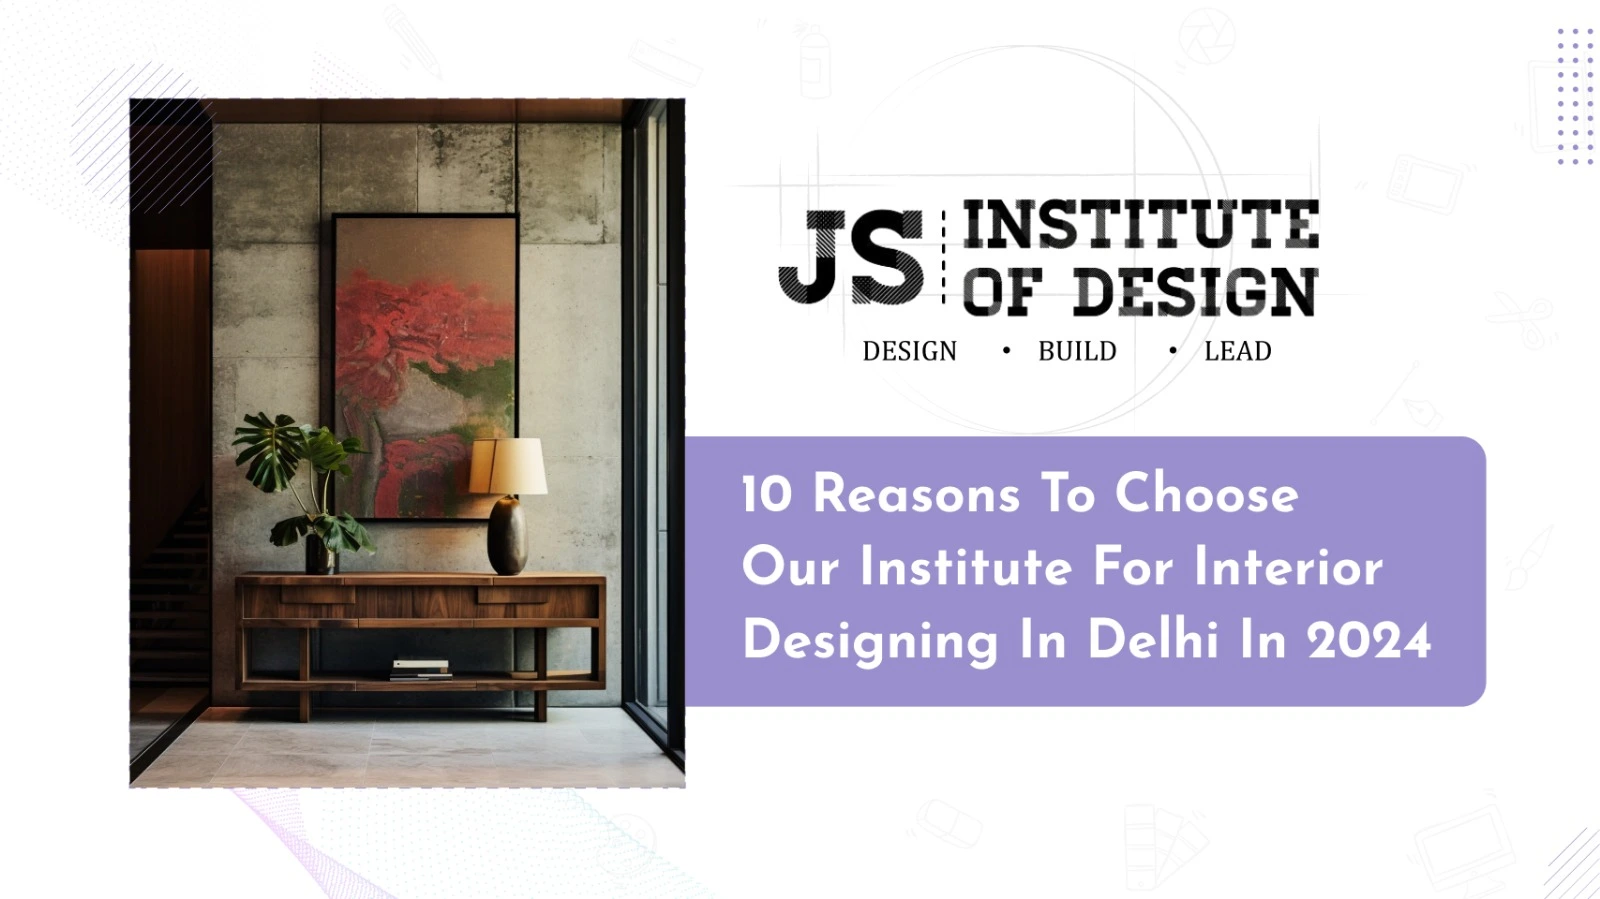 10 Reasons to Choose Our Institute for Interior Designing in Delhi in 2024